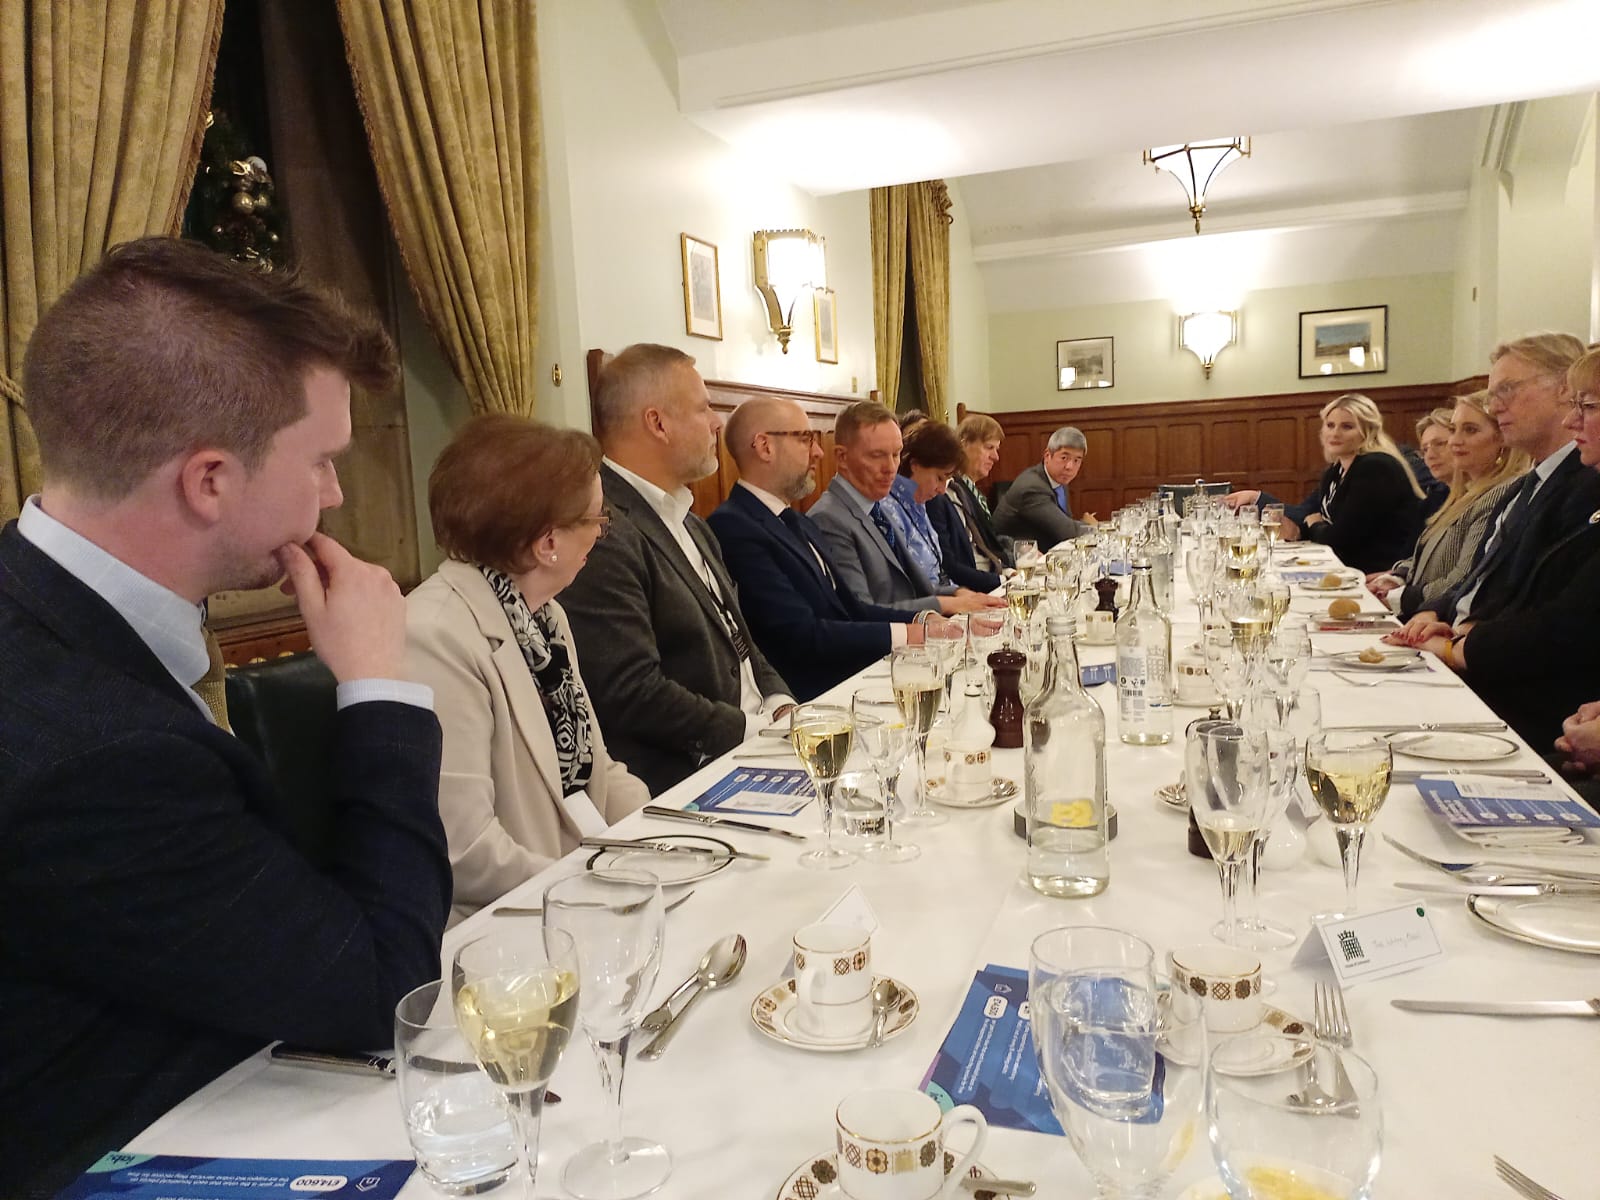 IAB Parliamentary dinner for Labour MPs